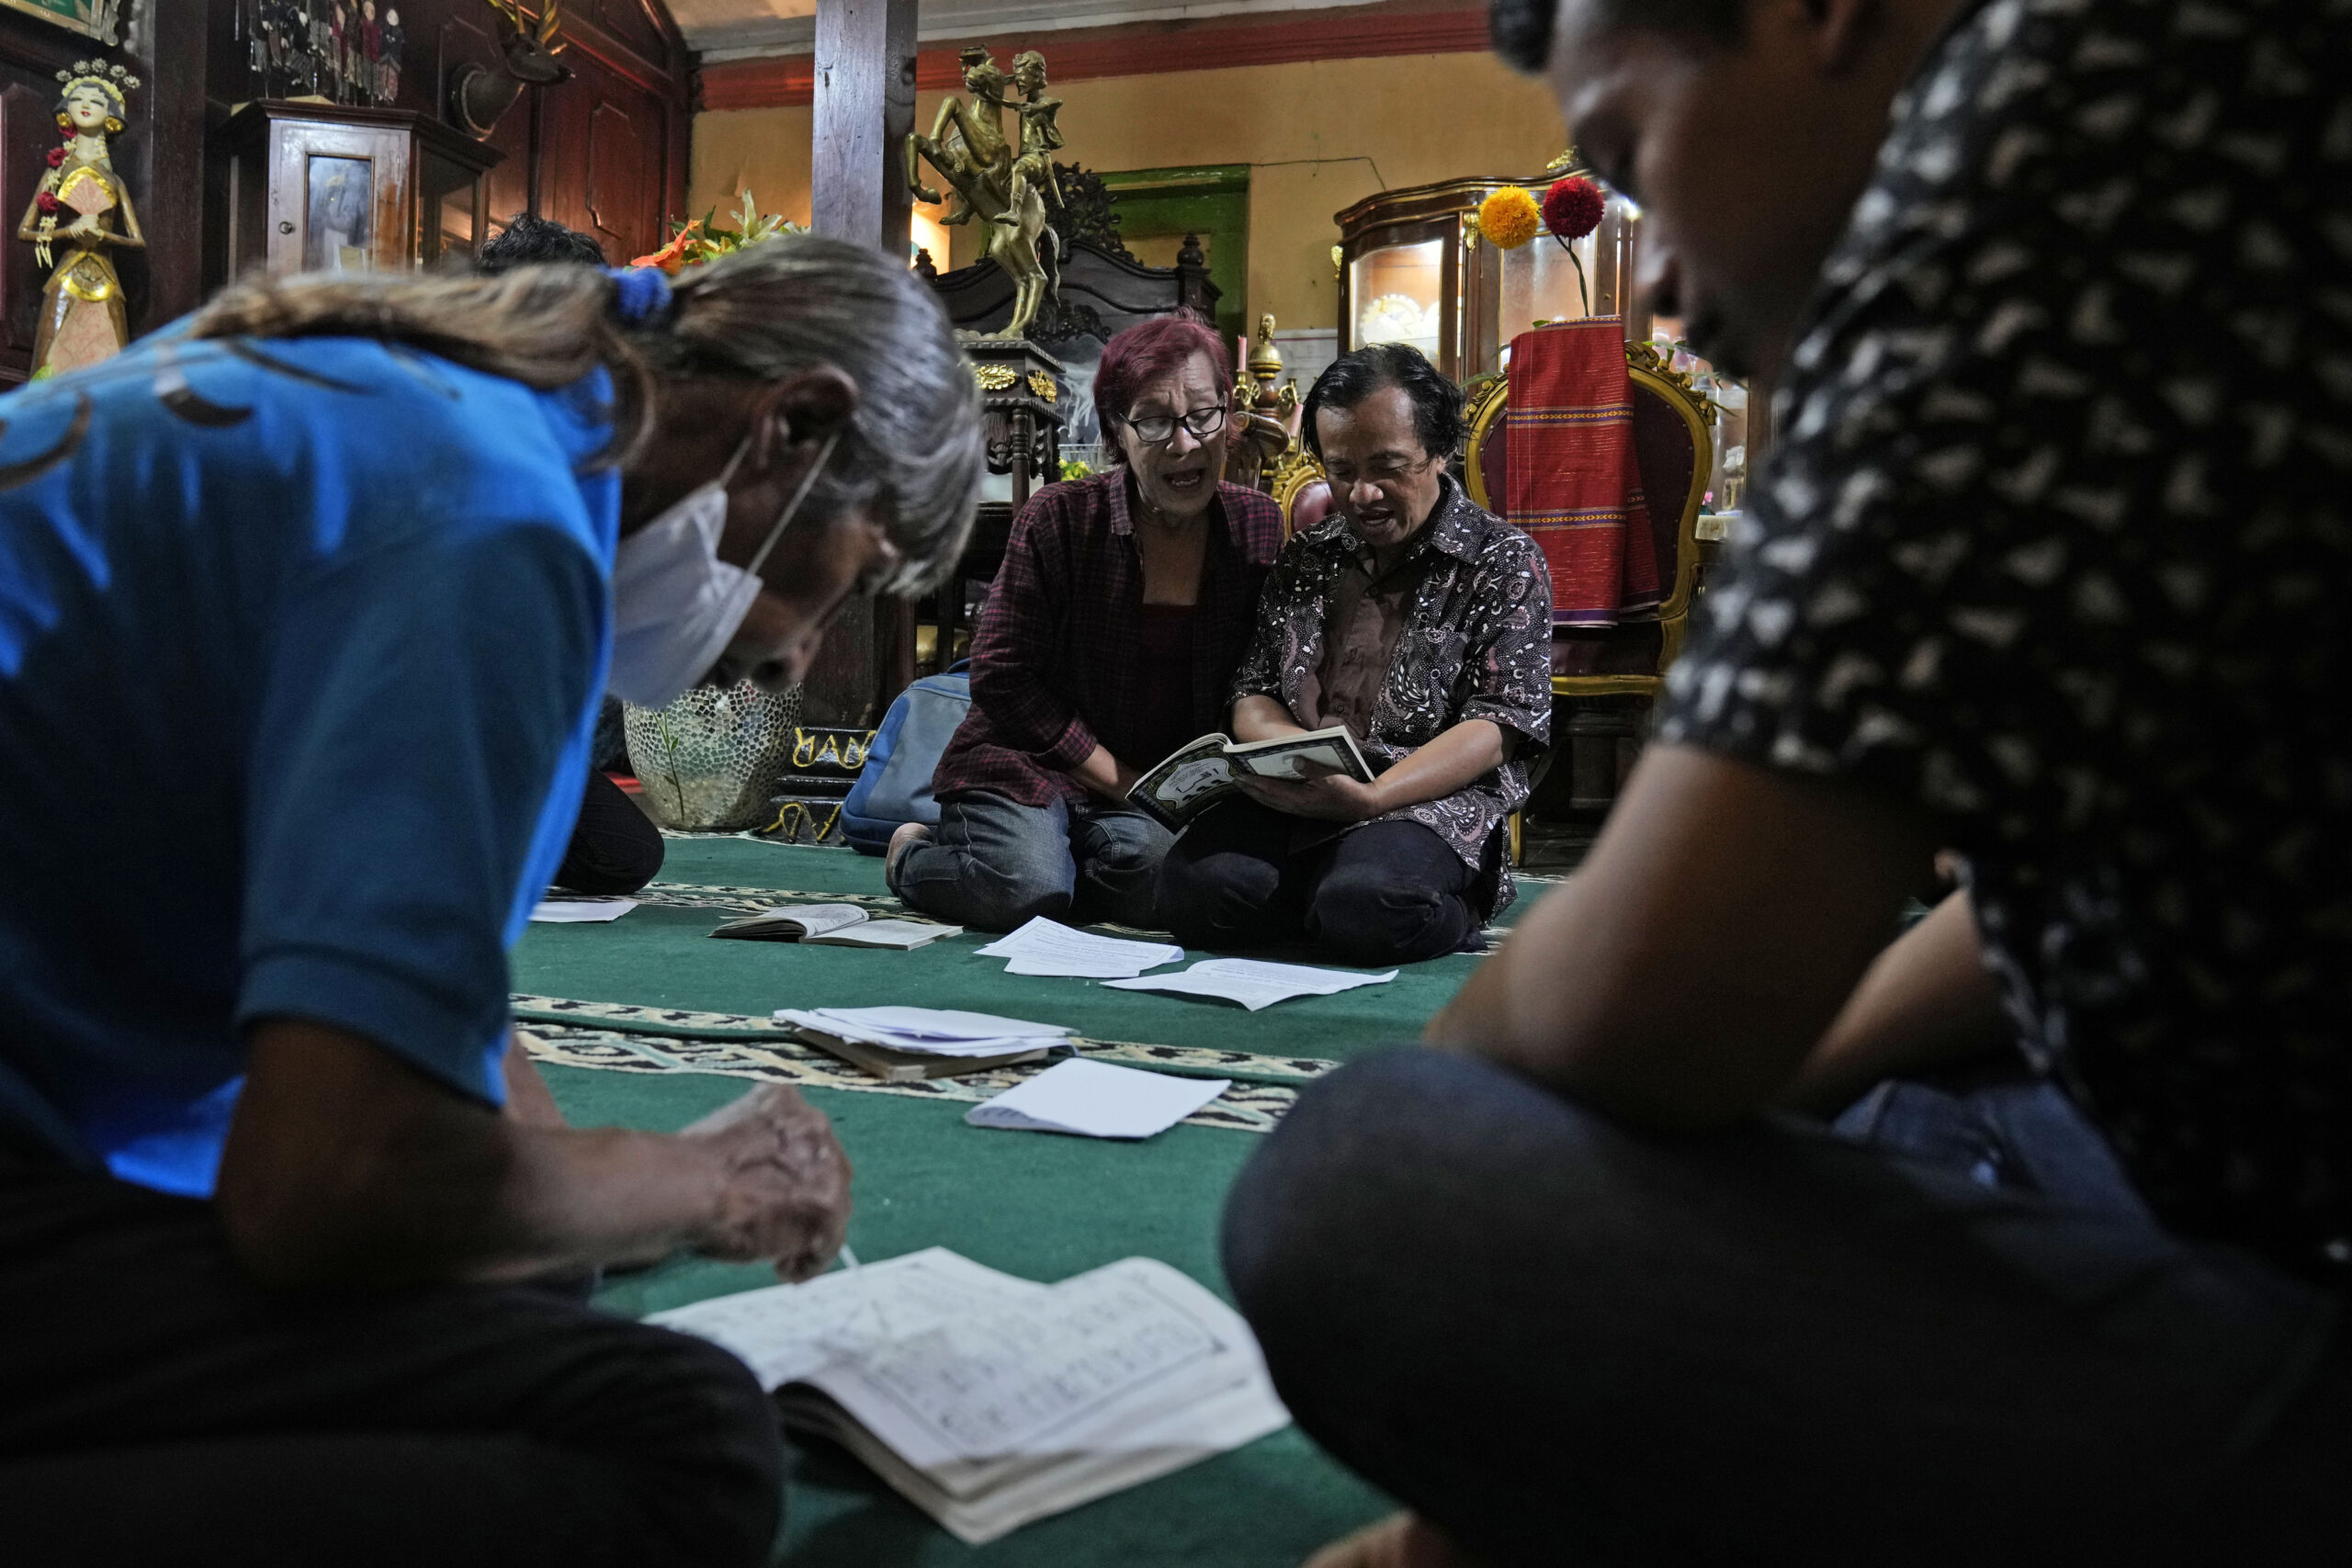 Trans women attend a Quran reading class at Al Fatah Islamic school for transgender women, in Yogyakarta, Indonesia, Sunday, Nov. 6, 2022. Compared to many Muslim nations, Indonesia is relatively tolerant. Scores of LGBTQ organizations operate openly, advocating for equal rights, offering counseling, liaising with religious leaders. (AP Photo/Dita Alangkara)